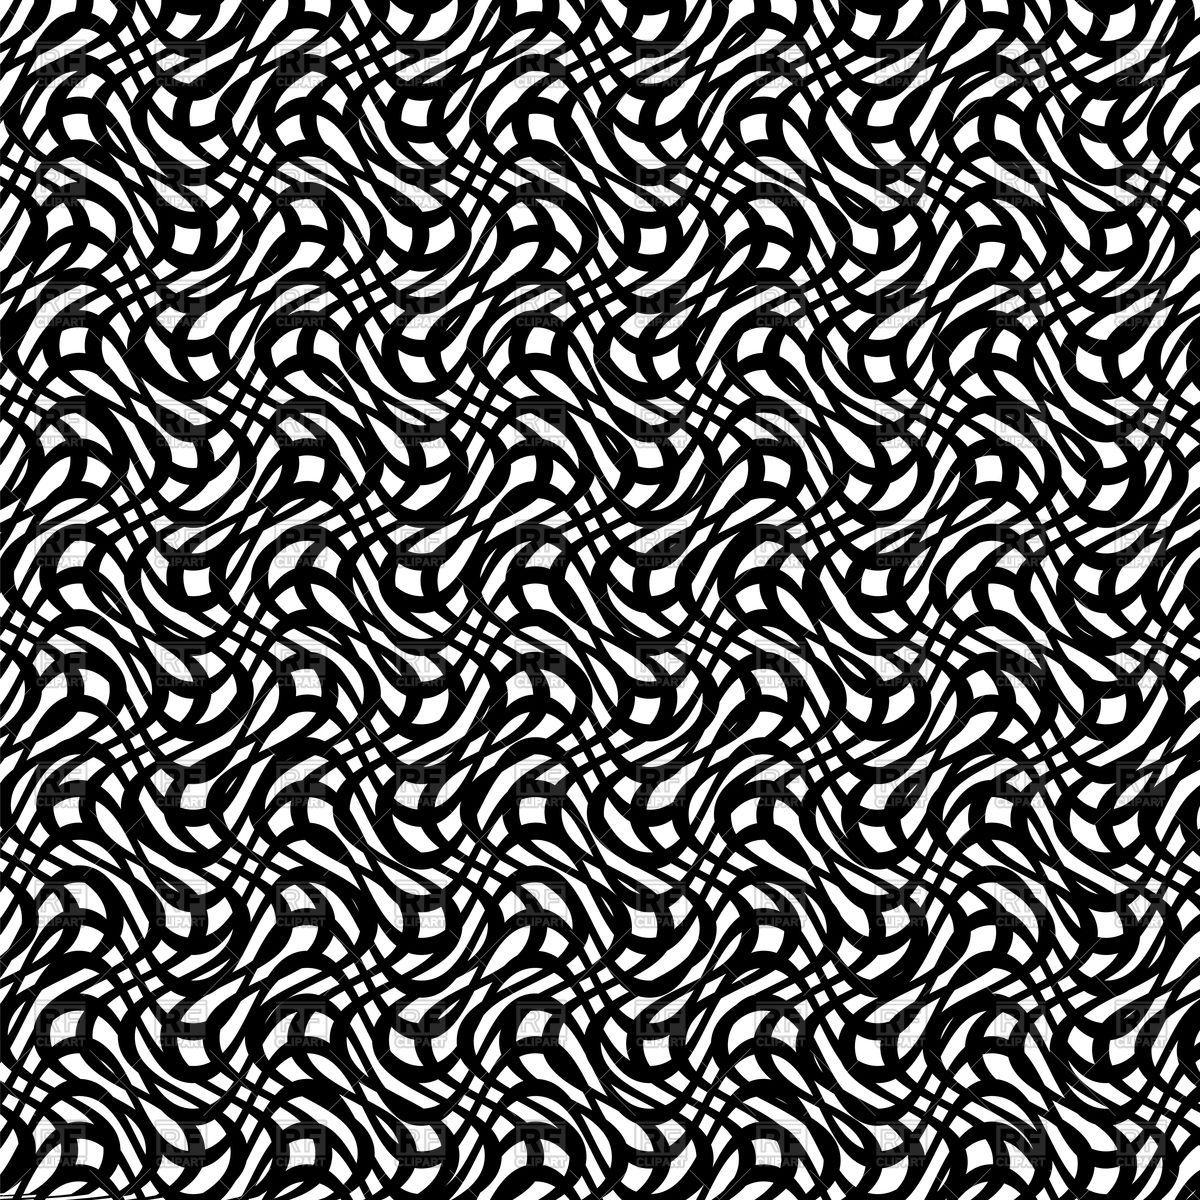 Black abstract hypnotic background Vector Image